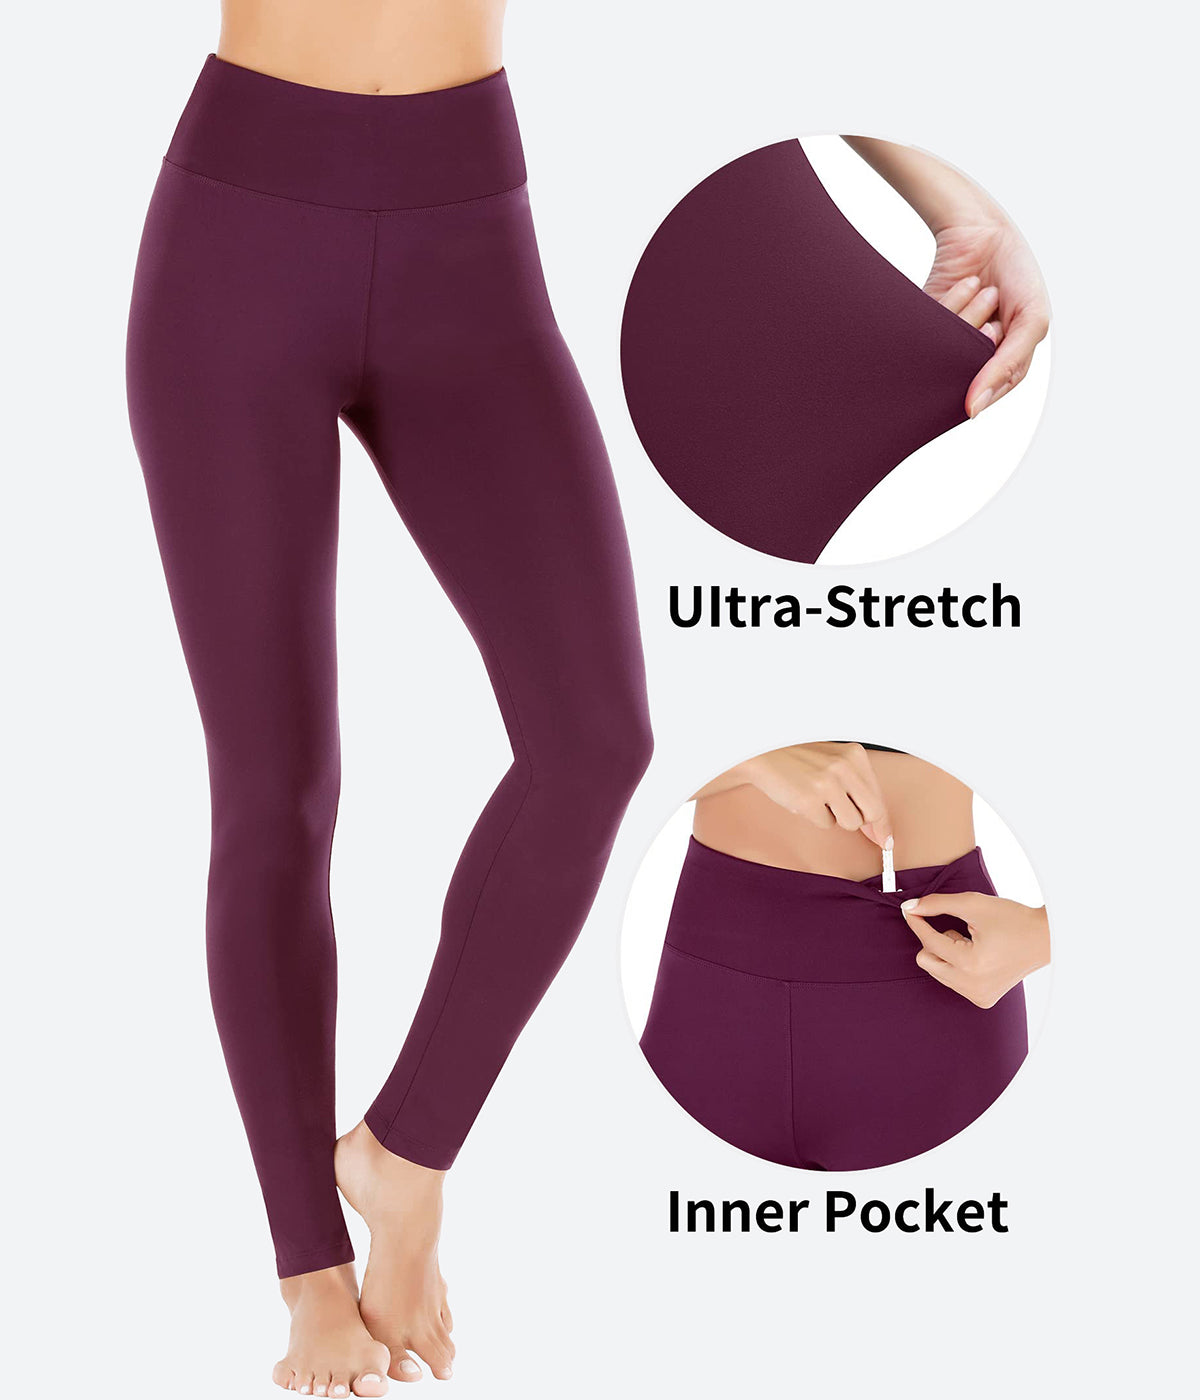 Buy Heathyoga Crossover Leggings with Pockets for Women High Waisted Yoga  Pants with Pockets Cross Waist Workout Leggings Black at